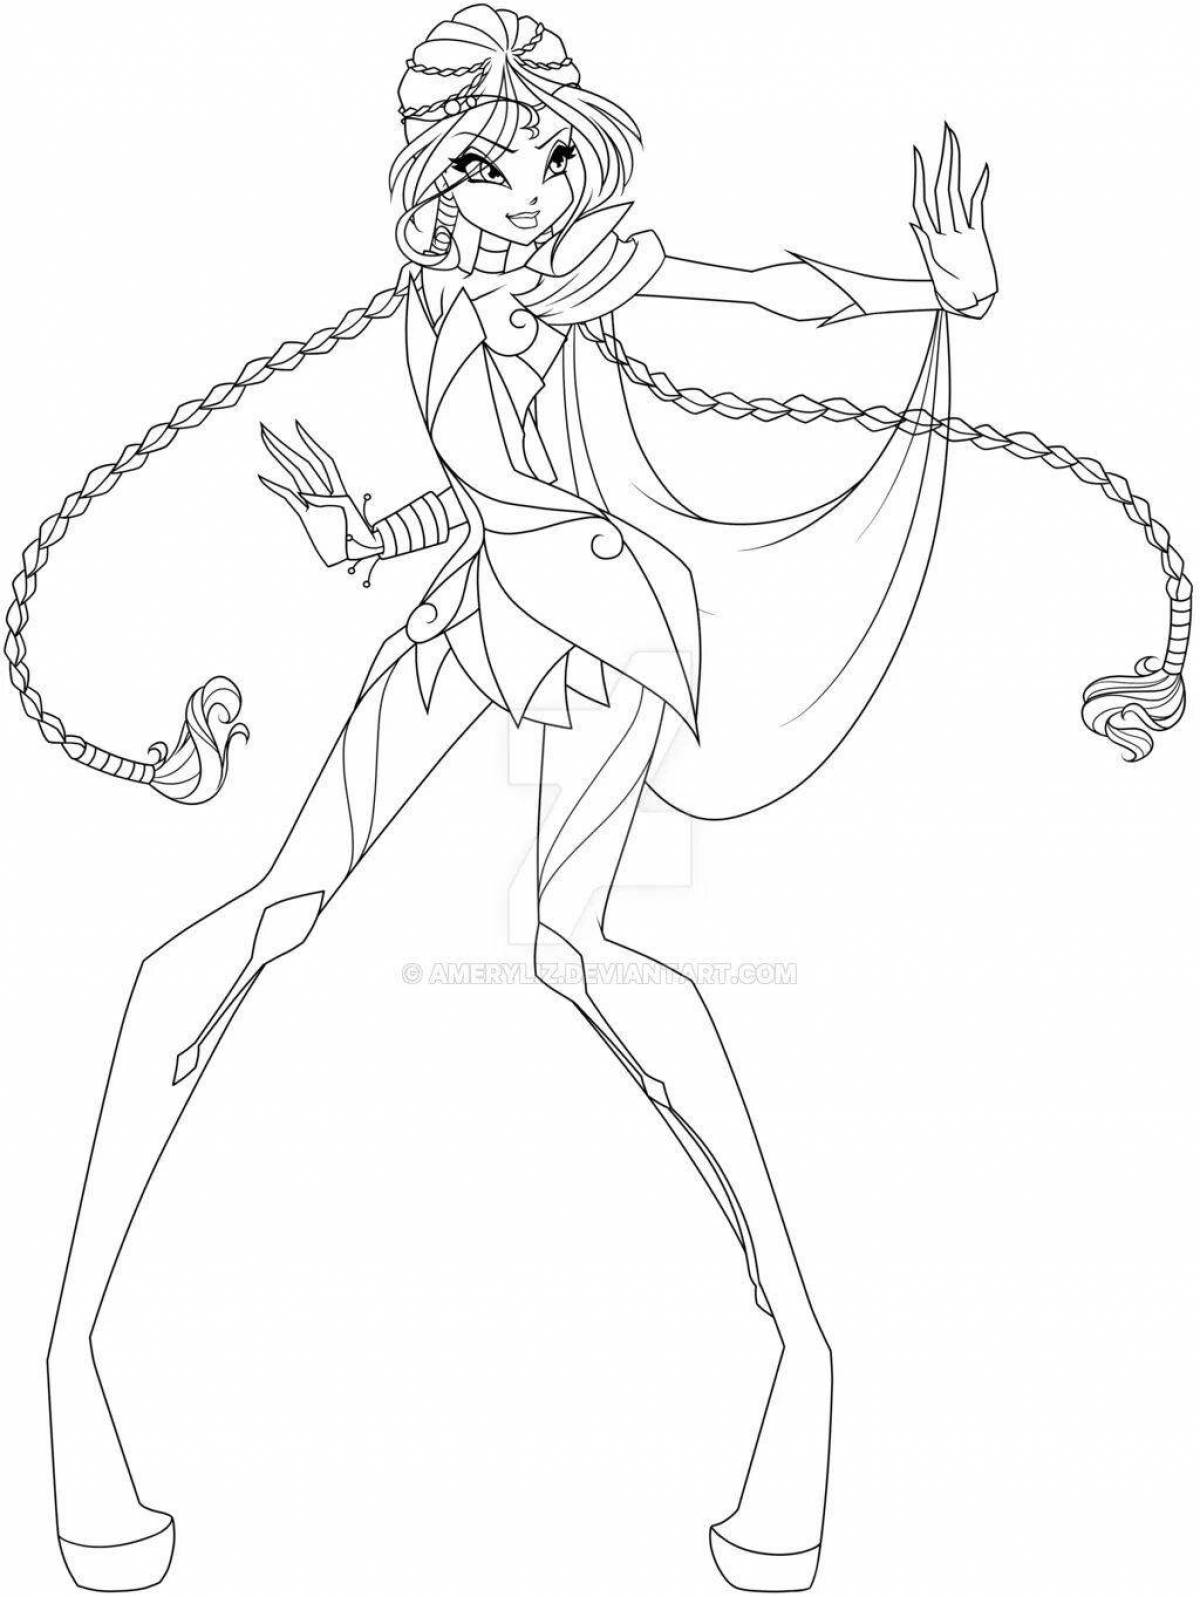 Adorable winx space coloring page